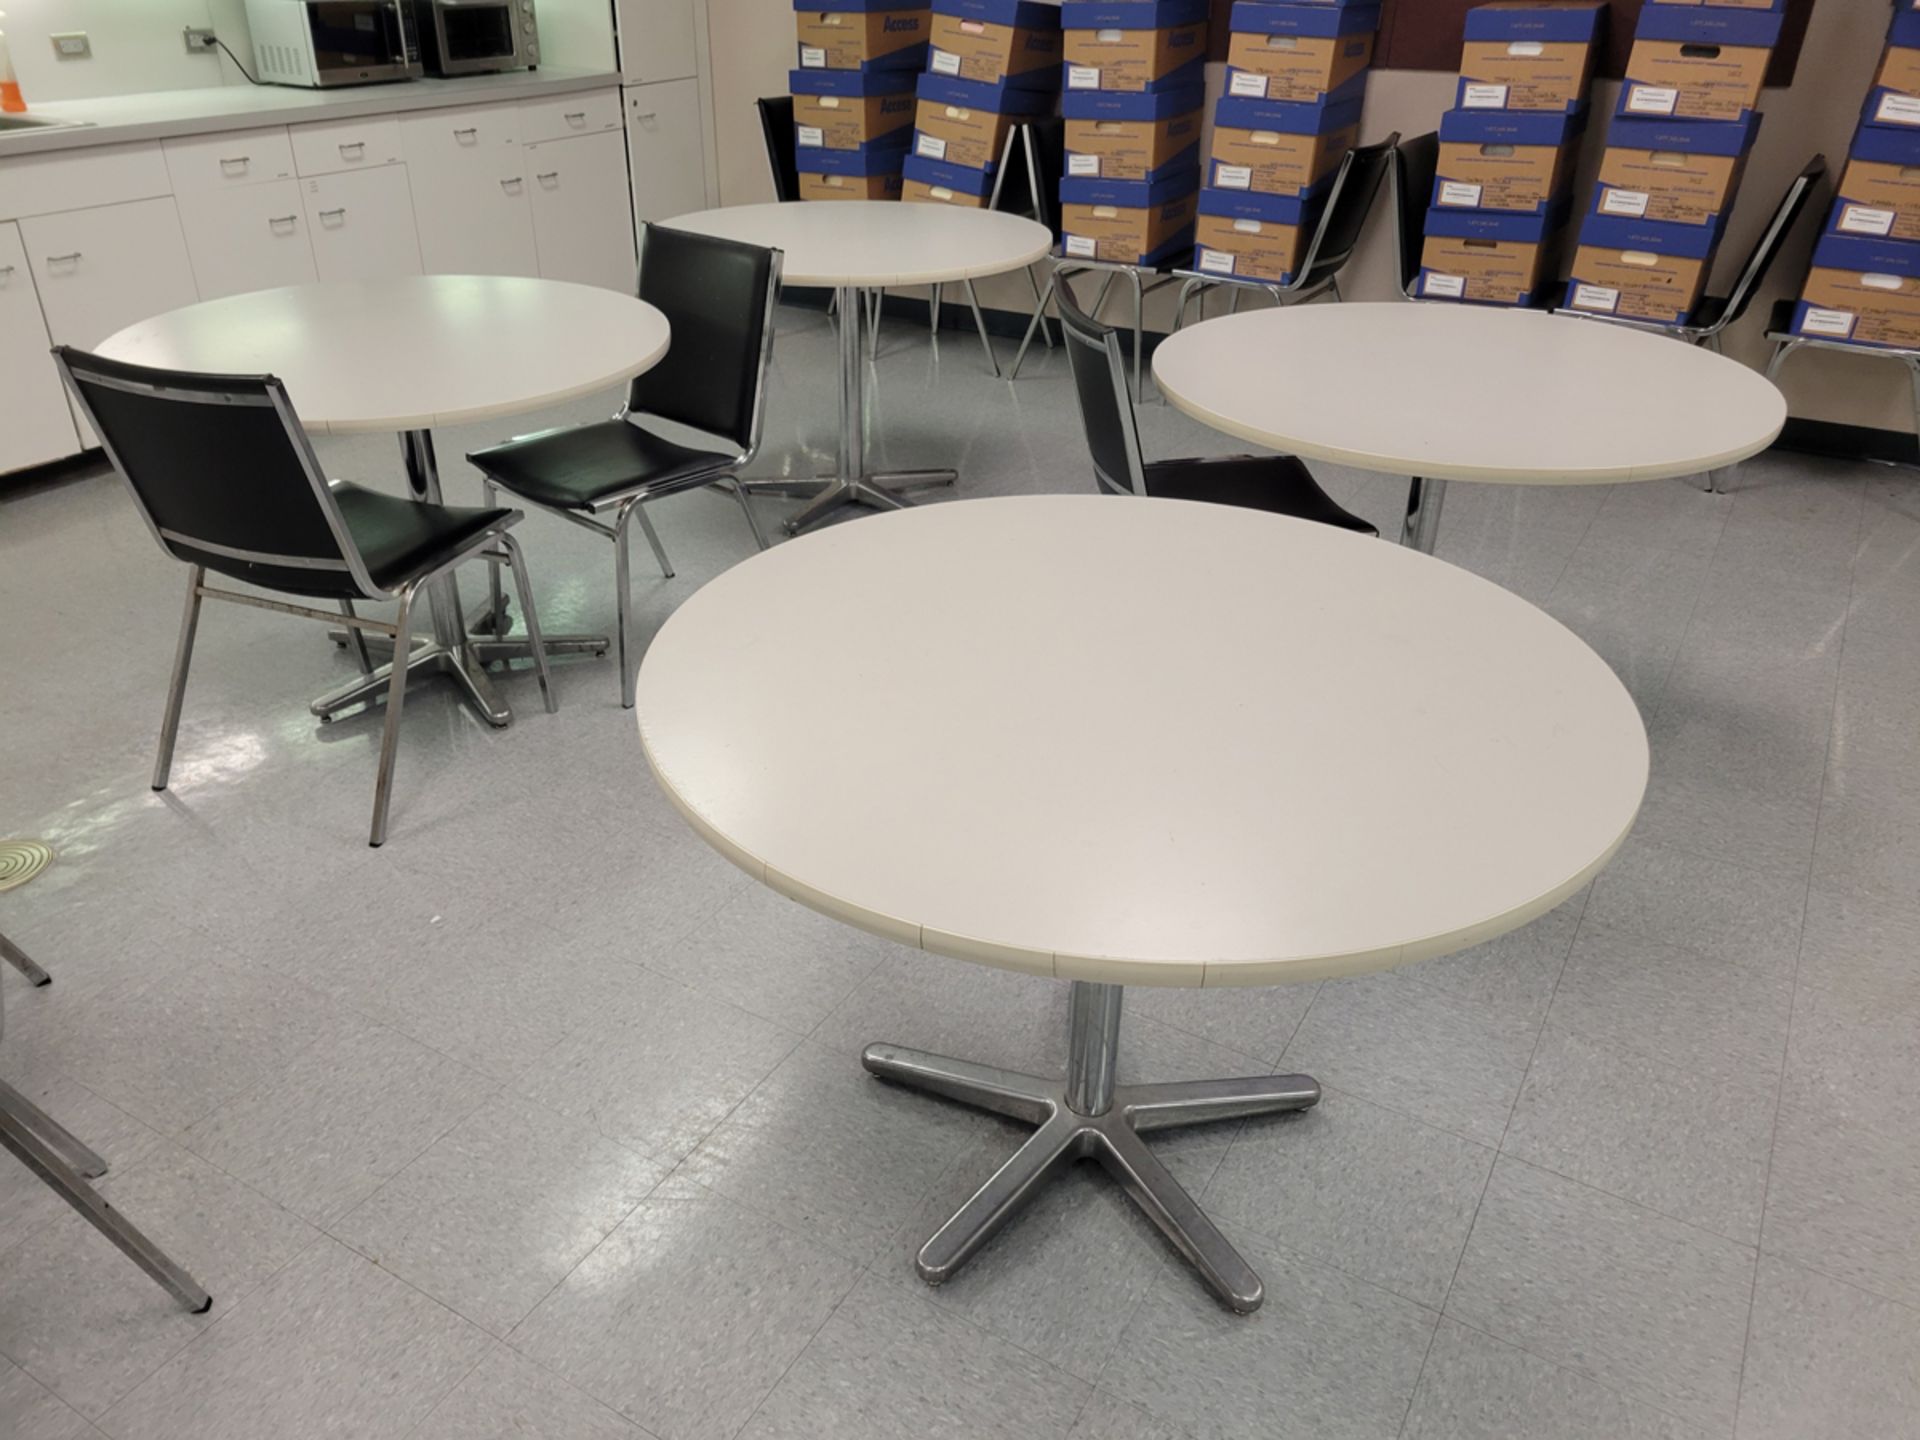 Group of Cafeteria Furniture